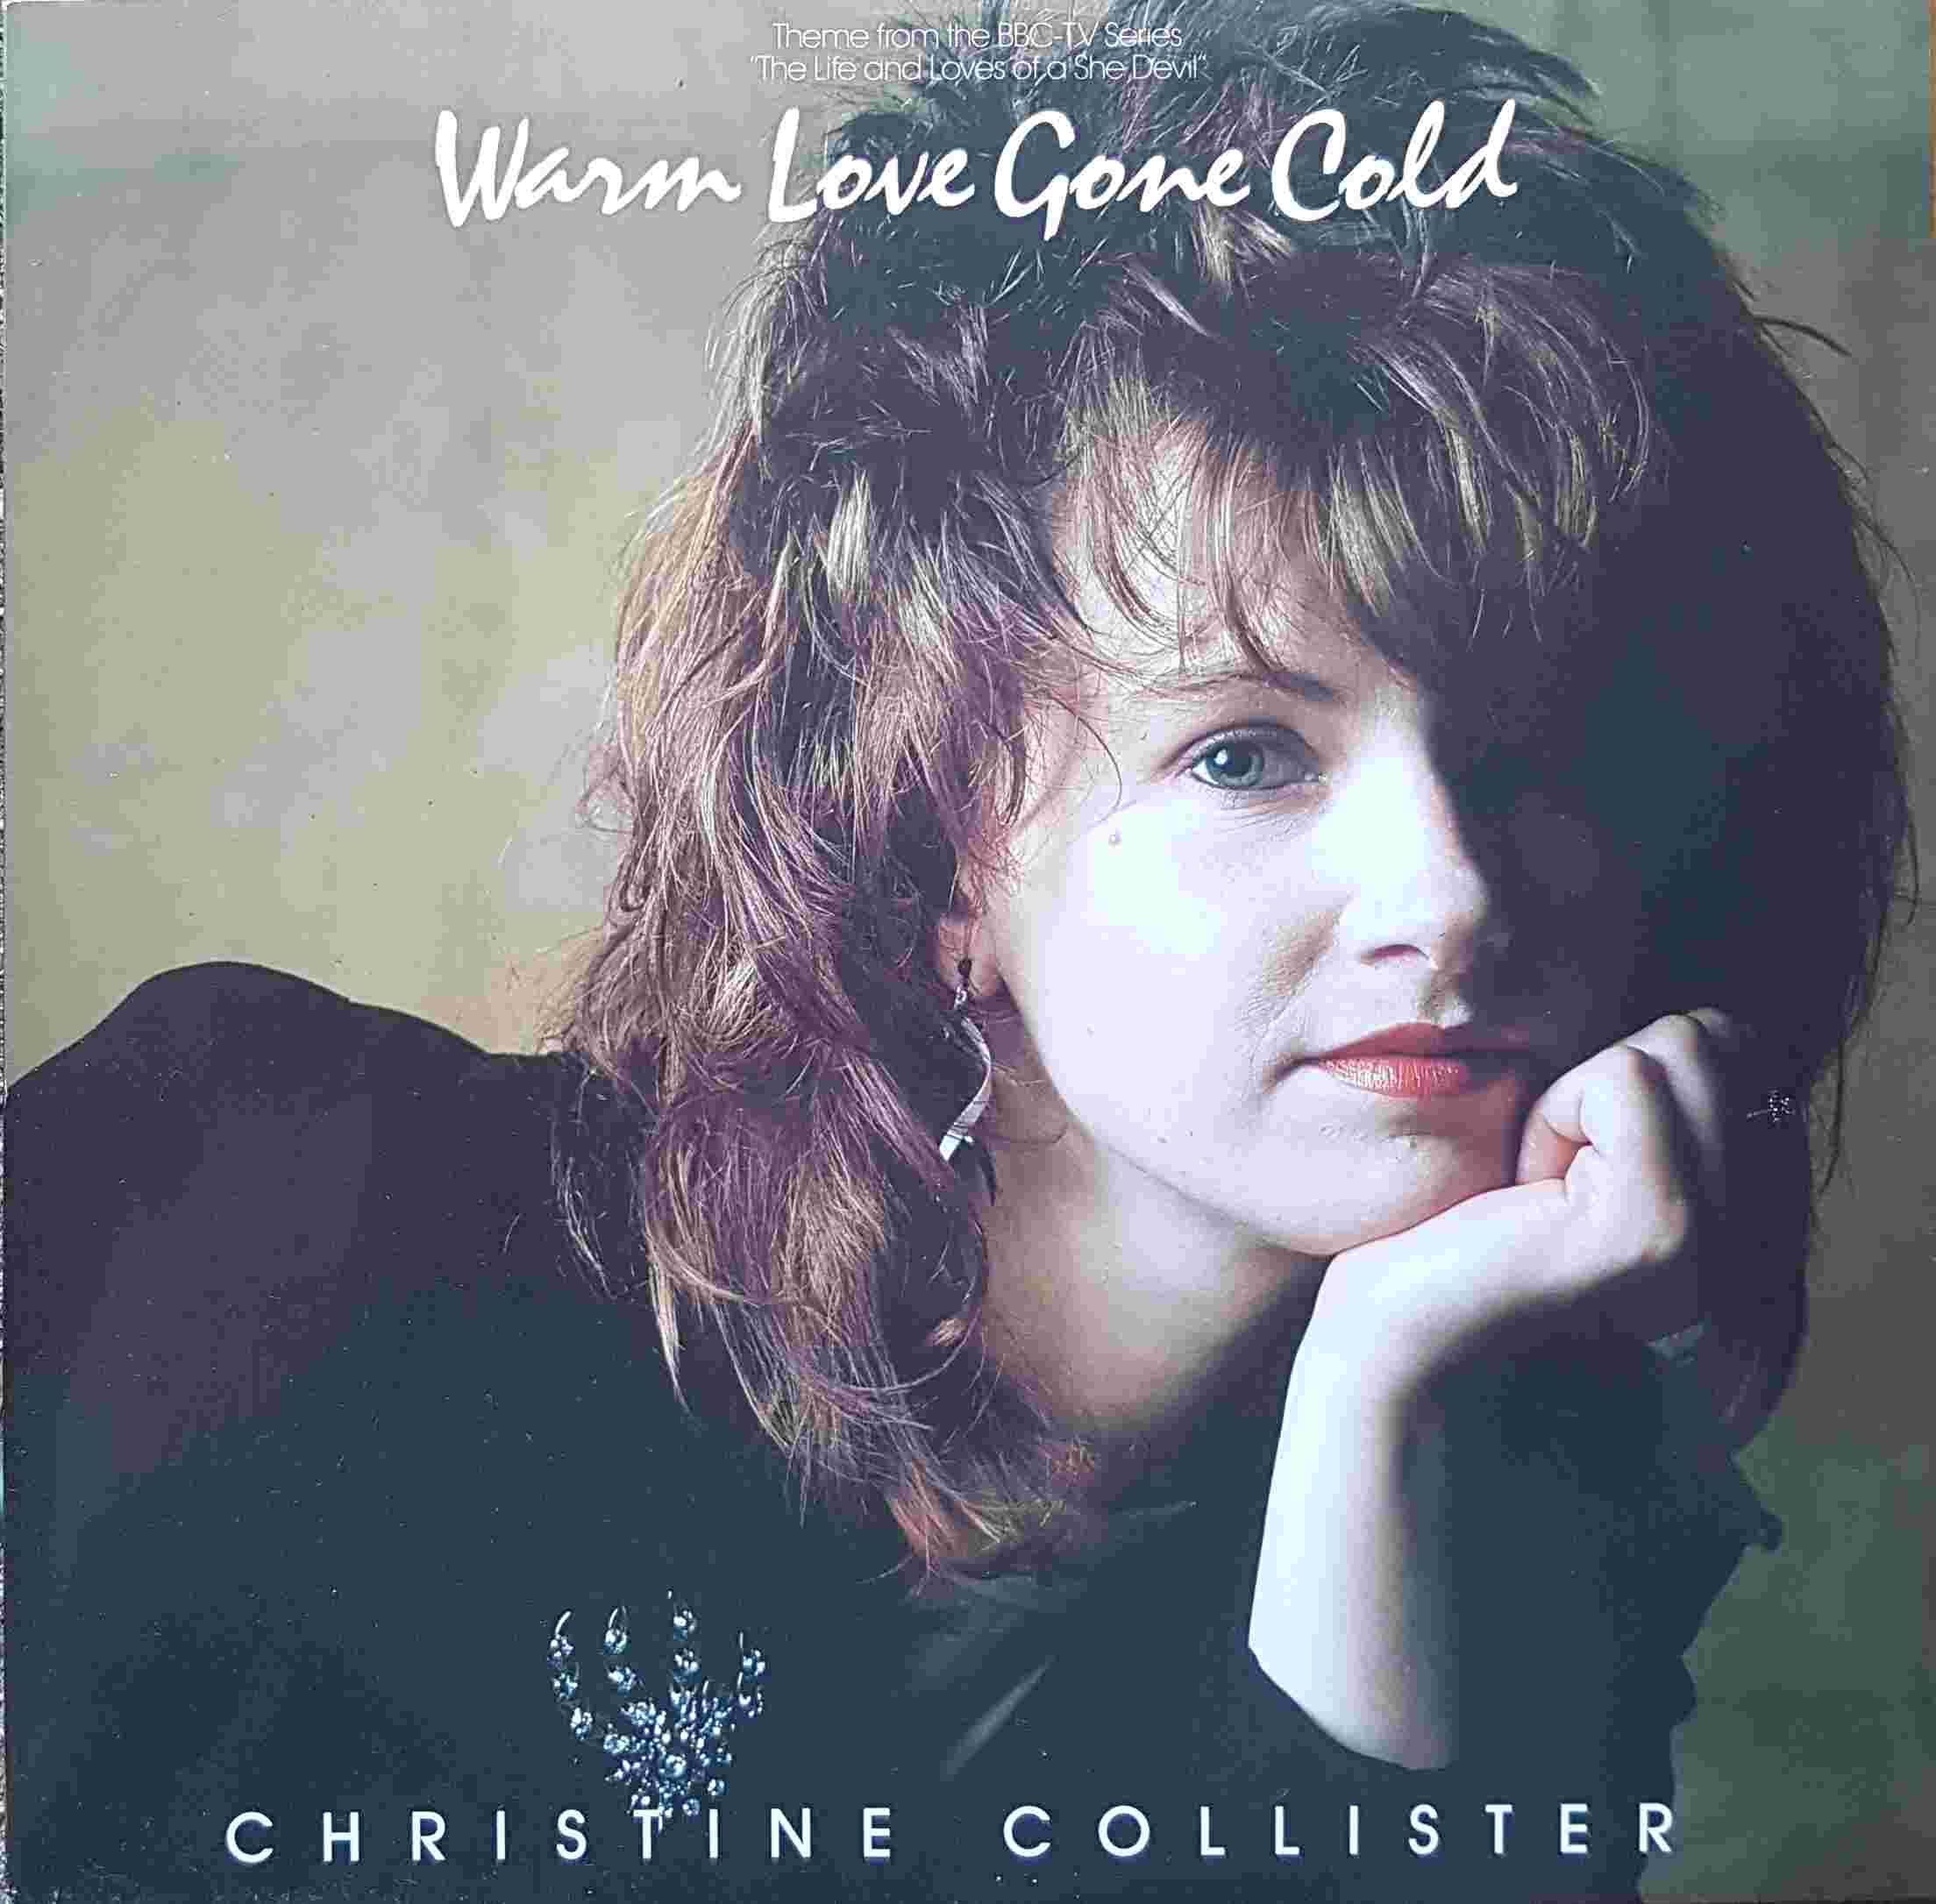 Picture of 12 RSL 199 Warm loves gone cold (Life and loves of a she devil) by artist Filleul / Mozart / Egre / Christine Collister